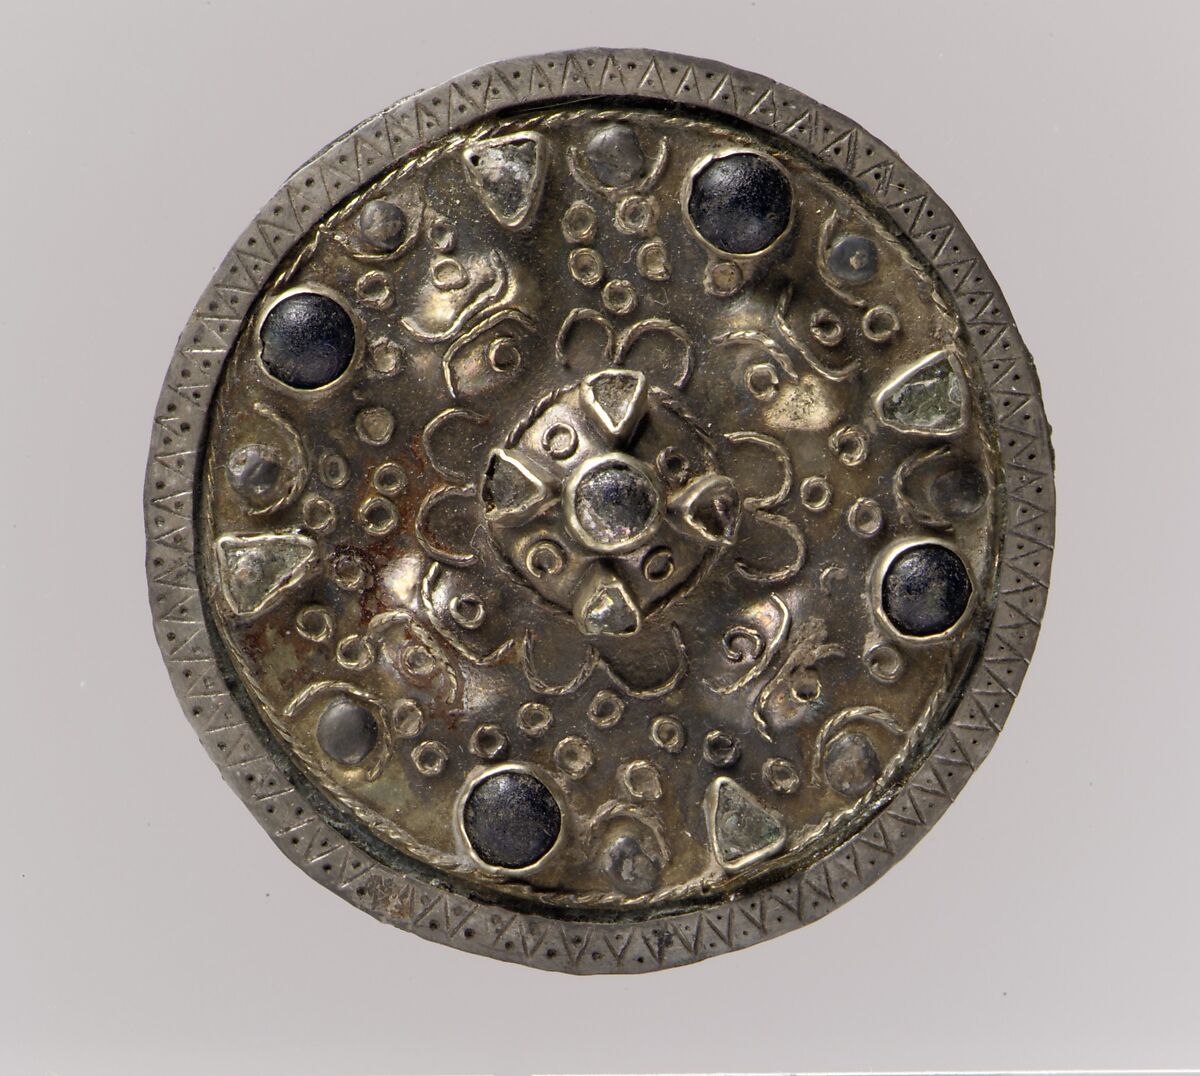 Disk Brooch, Copper alloy, Gold, wire, silver rim, paste cabochons, remnant of iron pin, Frankish 